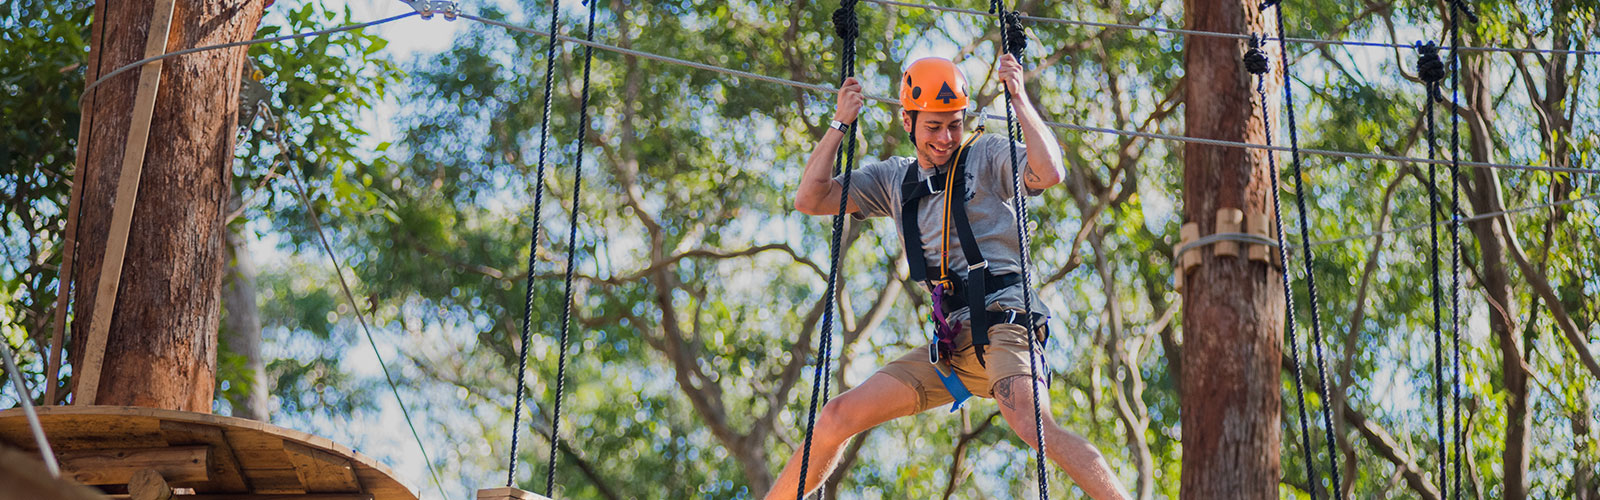 Treetops Adventure Central Coffs Harbour High Ropes Course